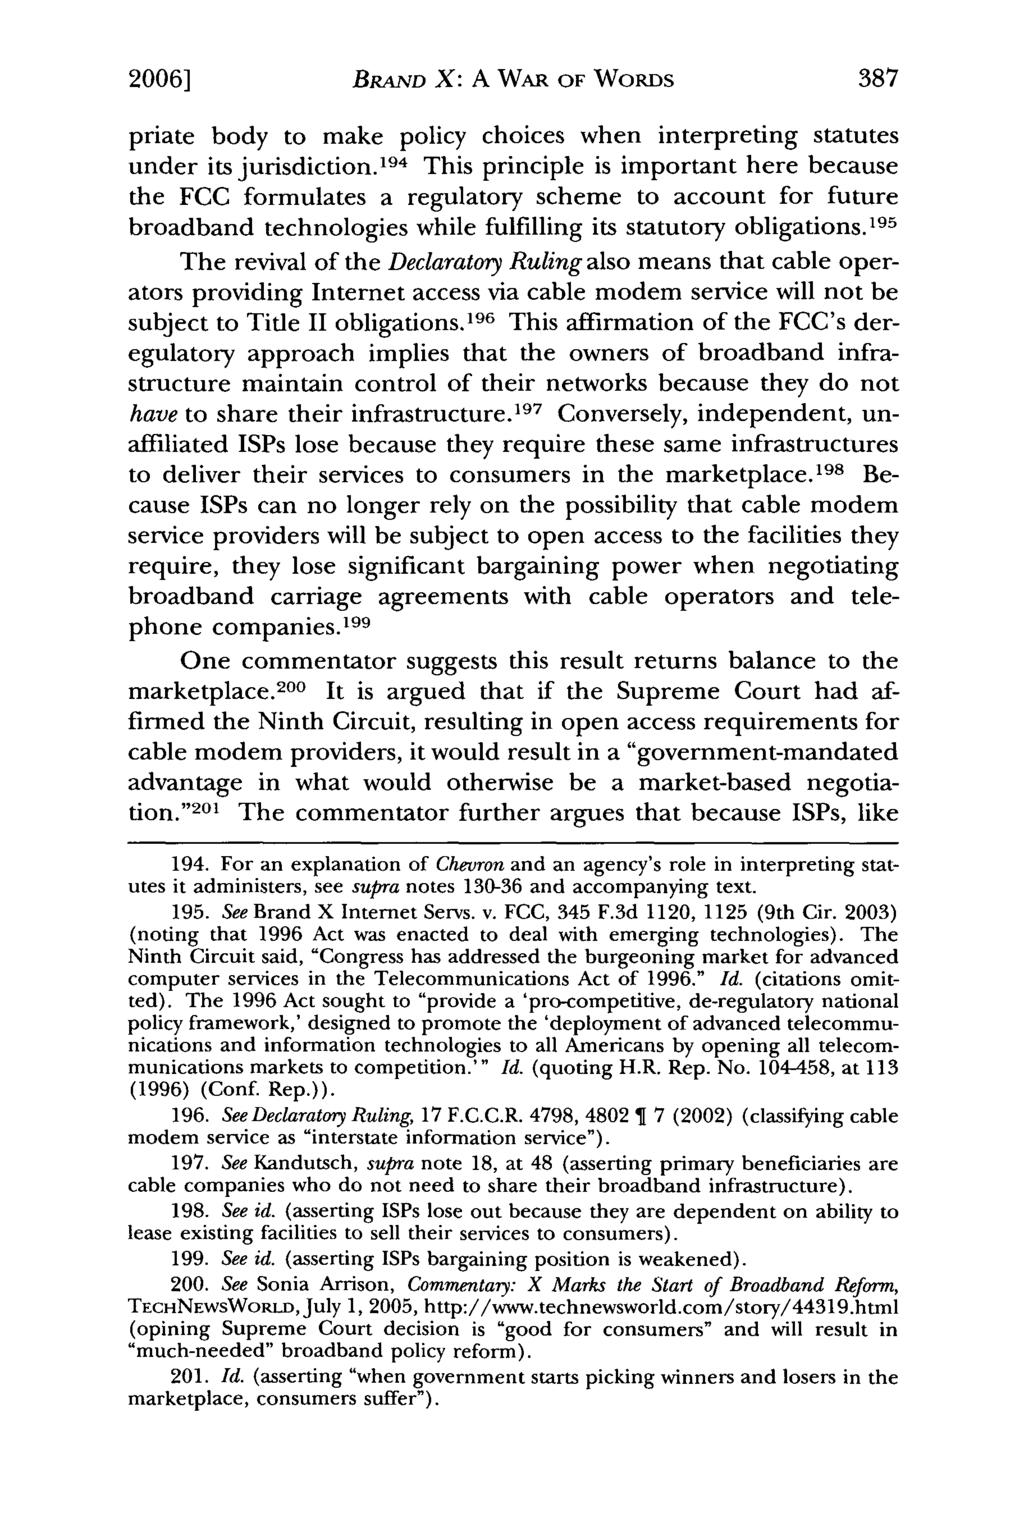 2006] Manni: National Cable & Telecommunications Ass'n v. Brand X Internet Ser BRAND X: A WAR OF WORDS priate body to make policy choices when interpreting statutes under its jurisdiction.